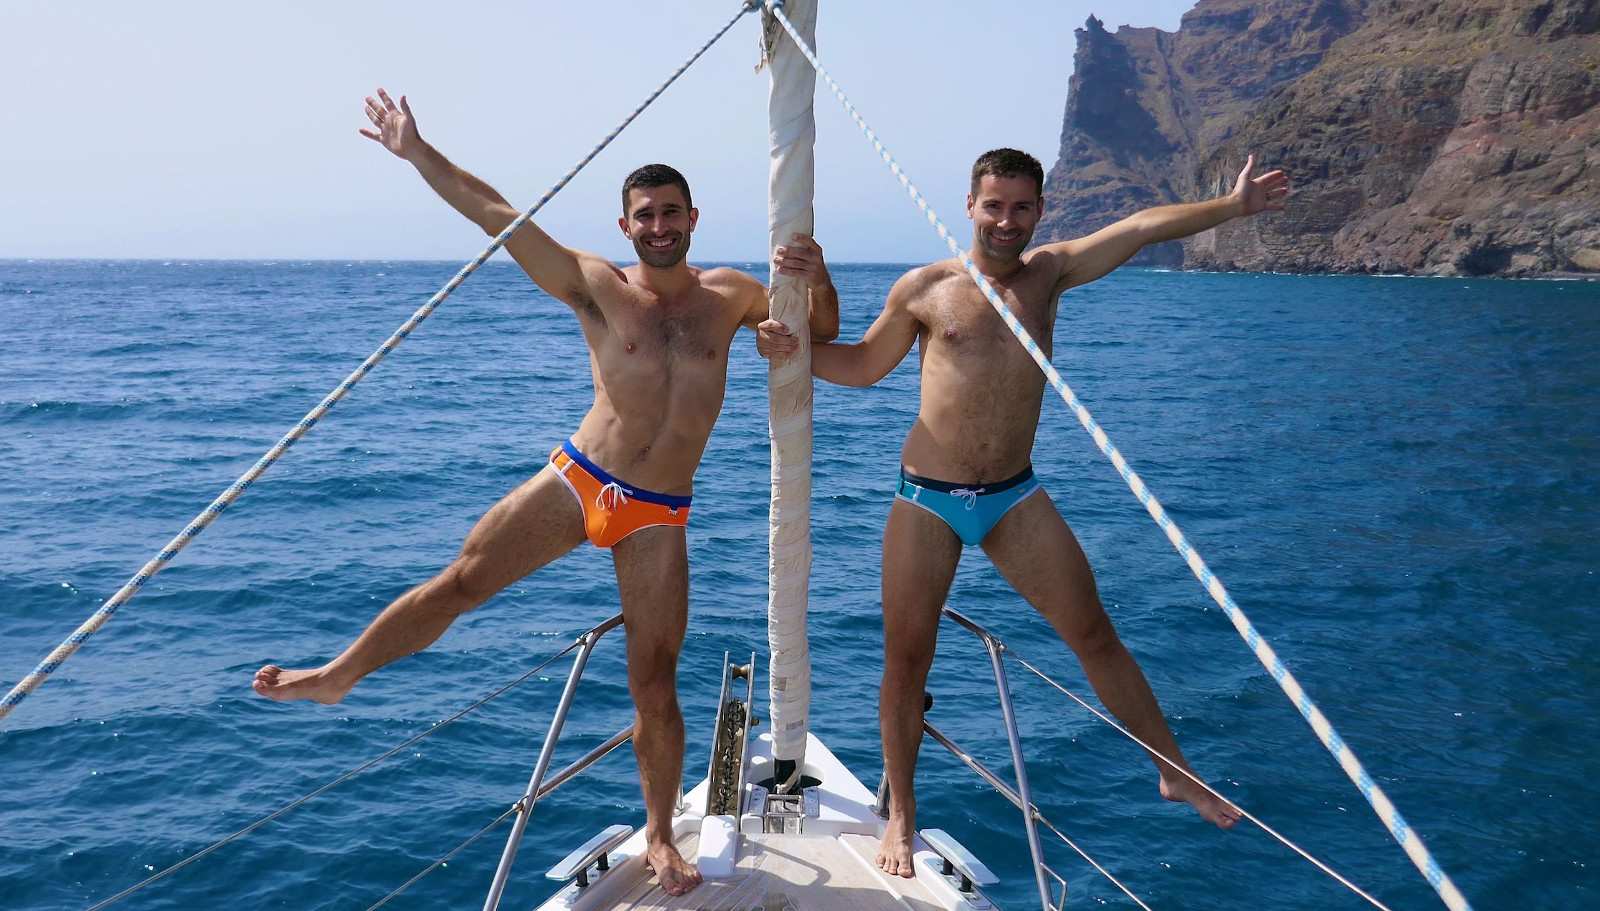 Nomadic Boys sailing in Gran Canaria, well known for being a gay friendly destination